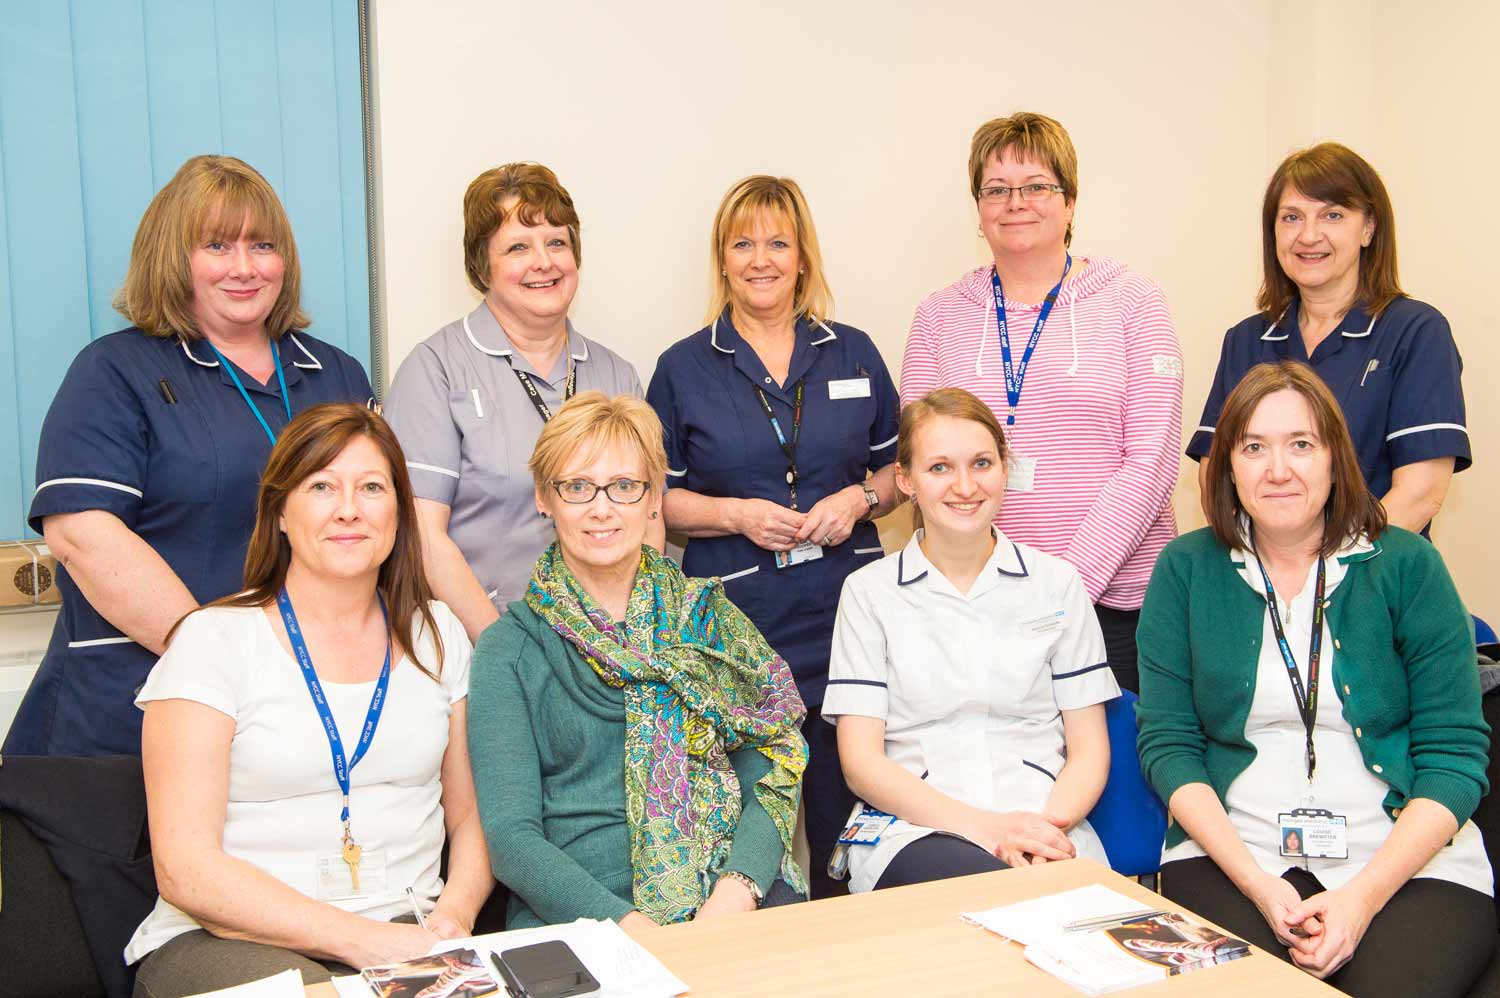 Some of the pilot What Matters to Us team (Gail Cooper District Nurse, middle back row)